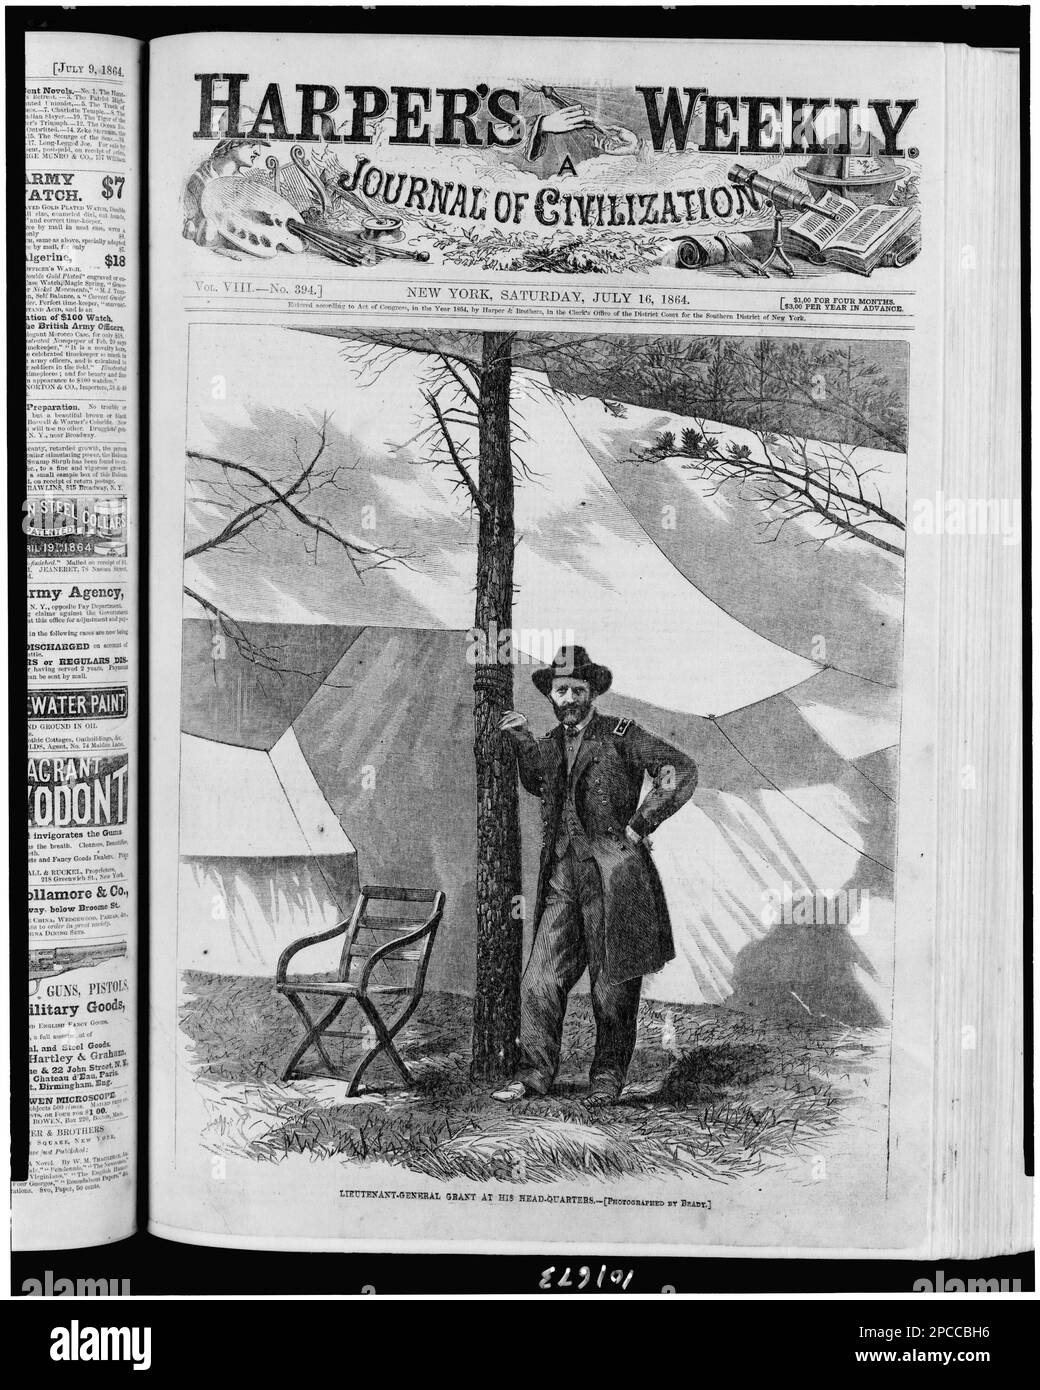 Lieutenant-General Grant at his head-quarters / photographed by Brady.. Illus. in: Harper's weekly, 1864 July 16, p. 449 (cover). Grant, Ulysses S, (Ulysses Simpson), 1822-1885, Military service, United States, History, Civil War, 1861-1865, Military facilities, Union. Stock Photo